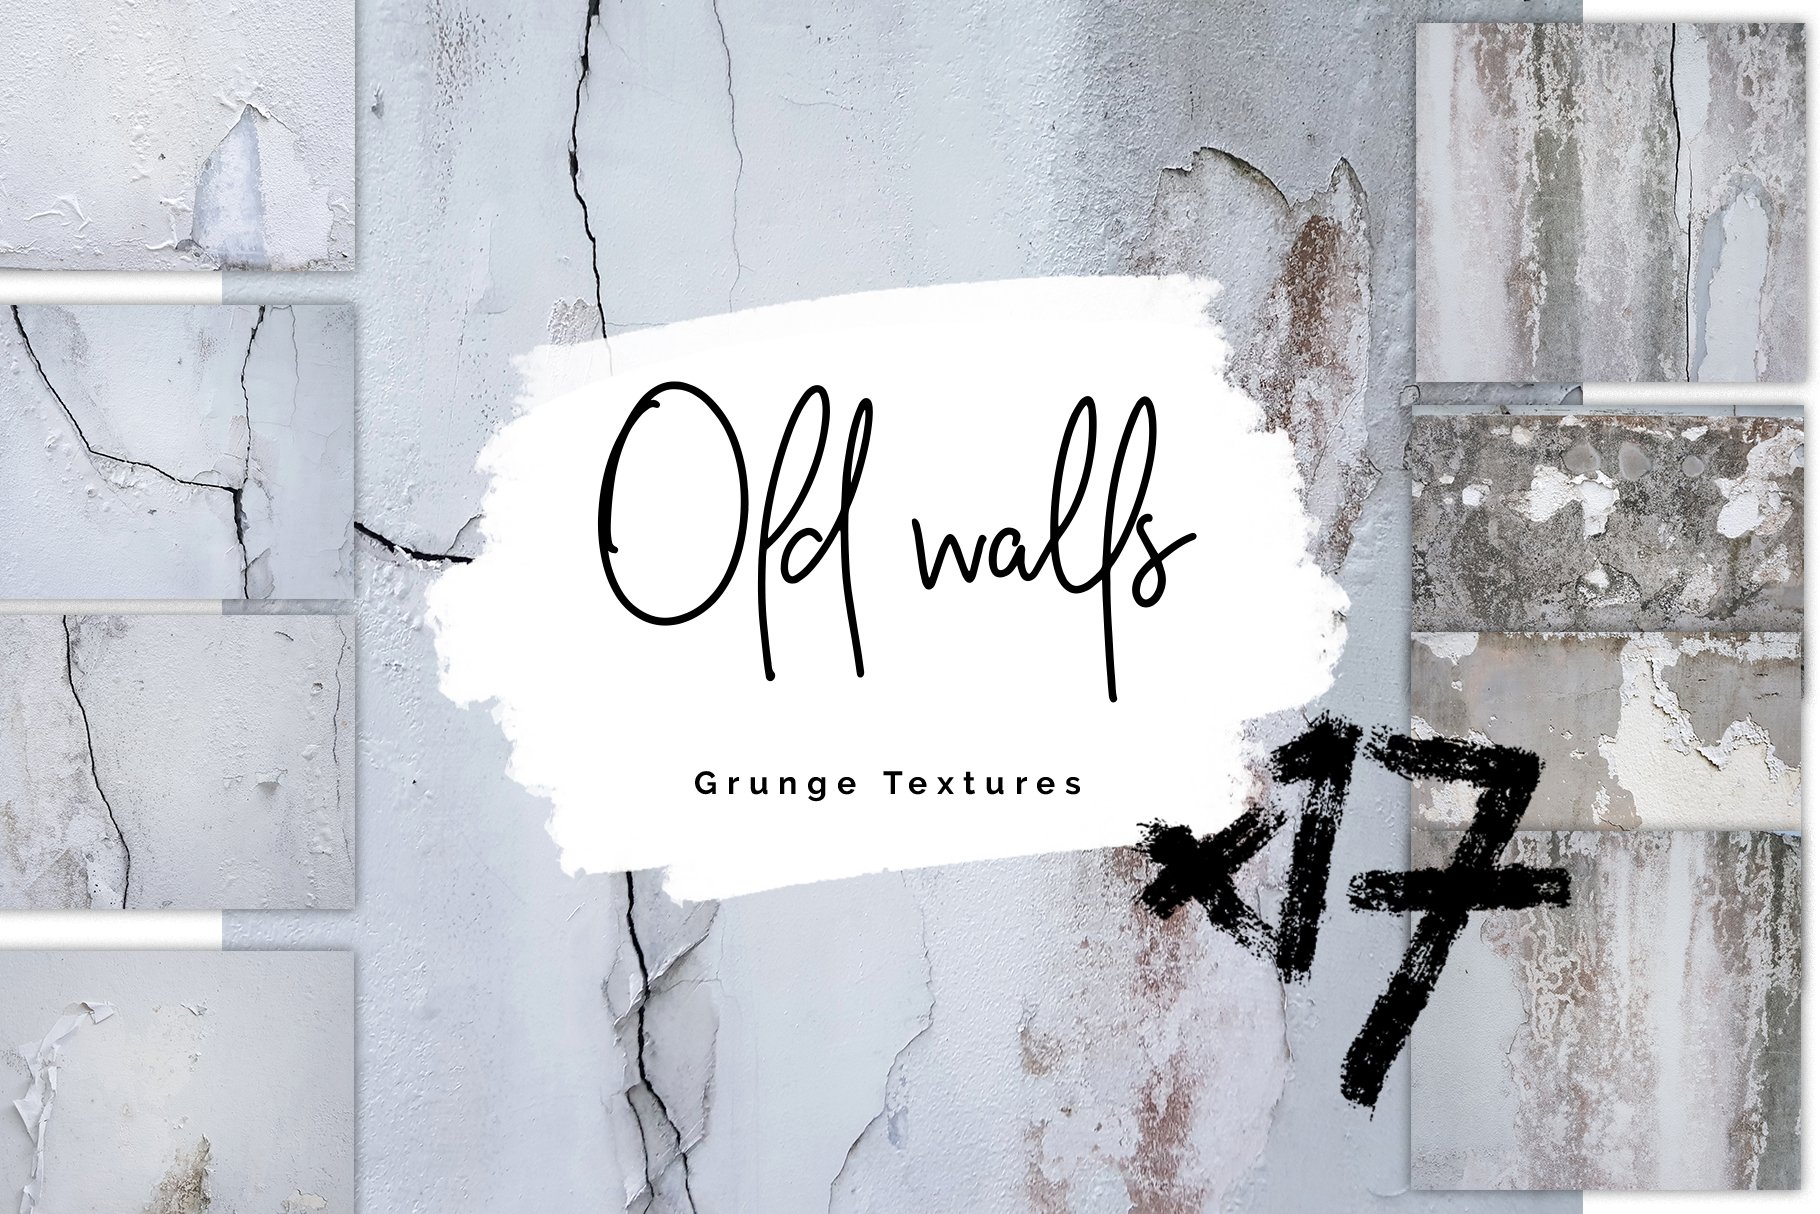 Old Walls Grunge textures cover image.